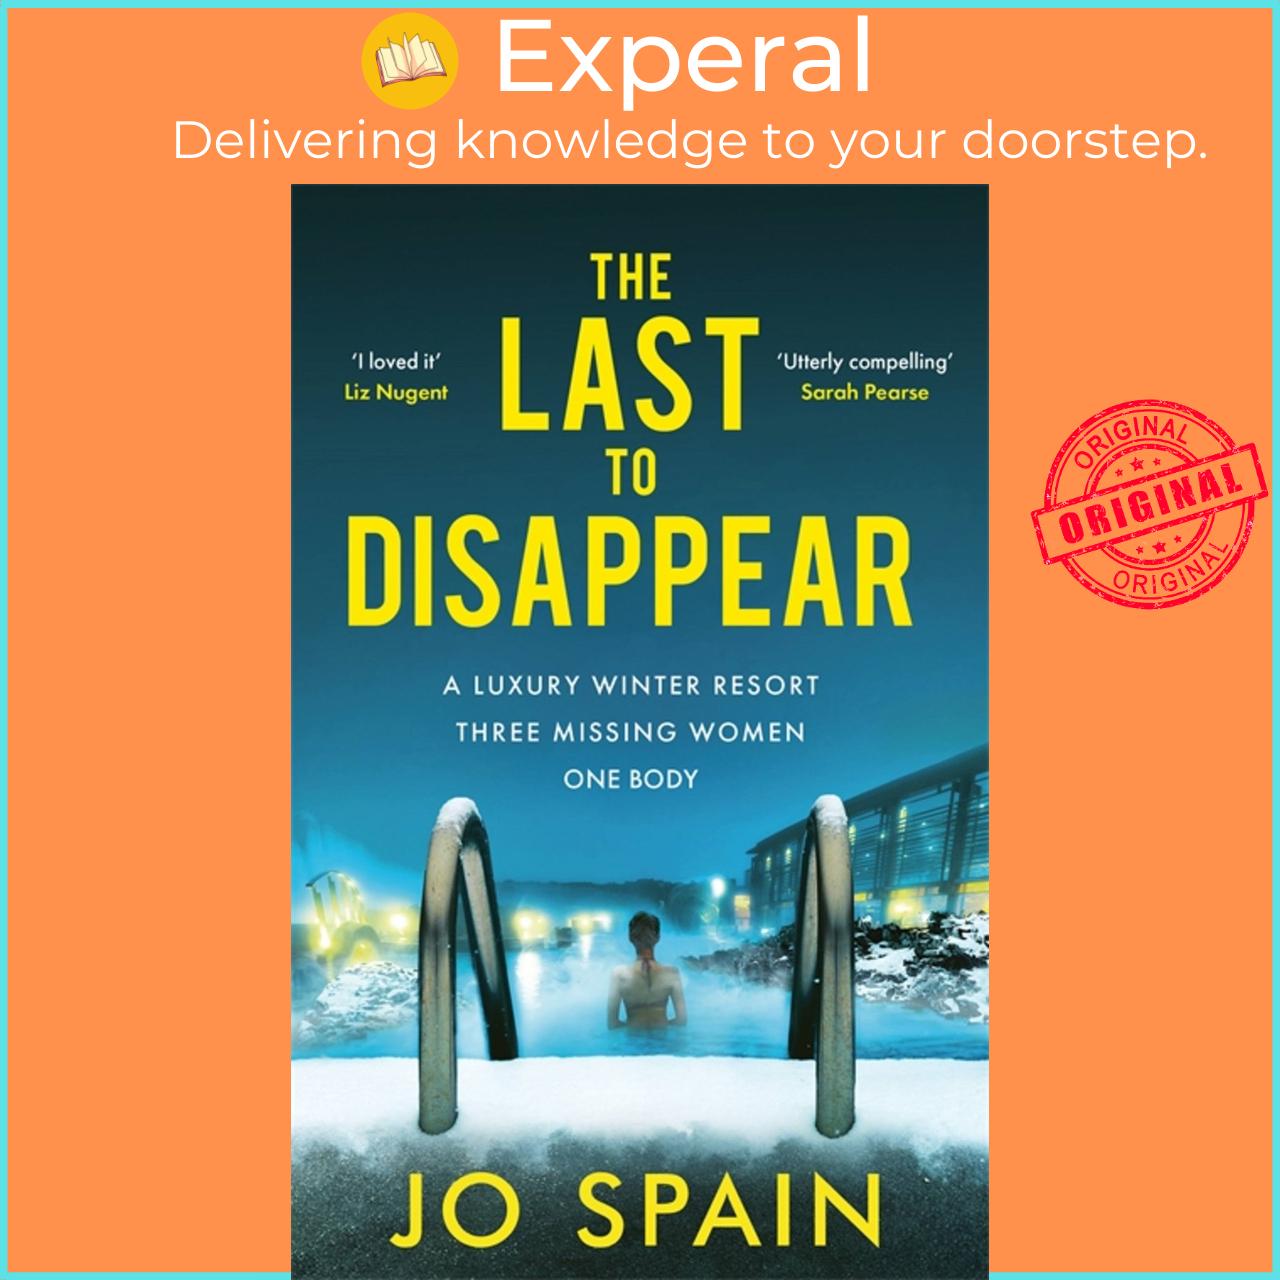 Sách - The Last to Disappear : The chilling new thriller from the author of The Perf by Jo Spain (UK edition, hardcover)